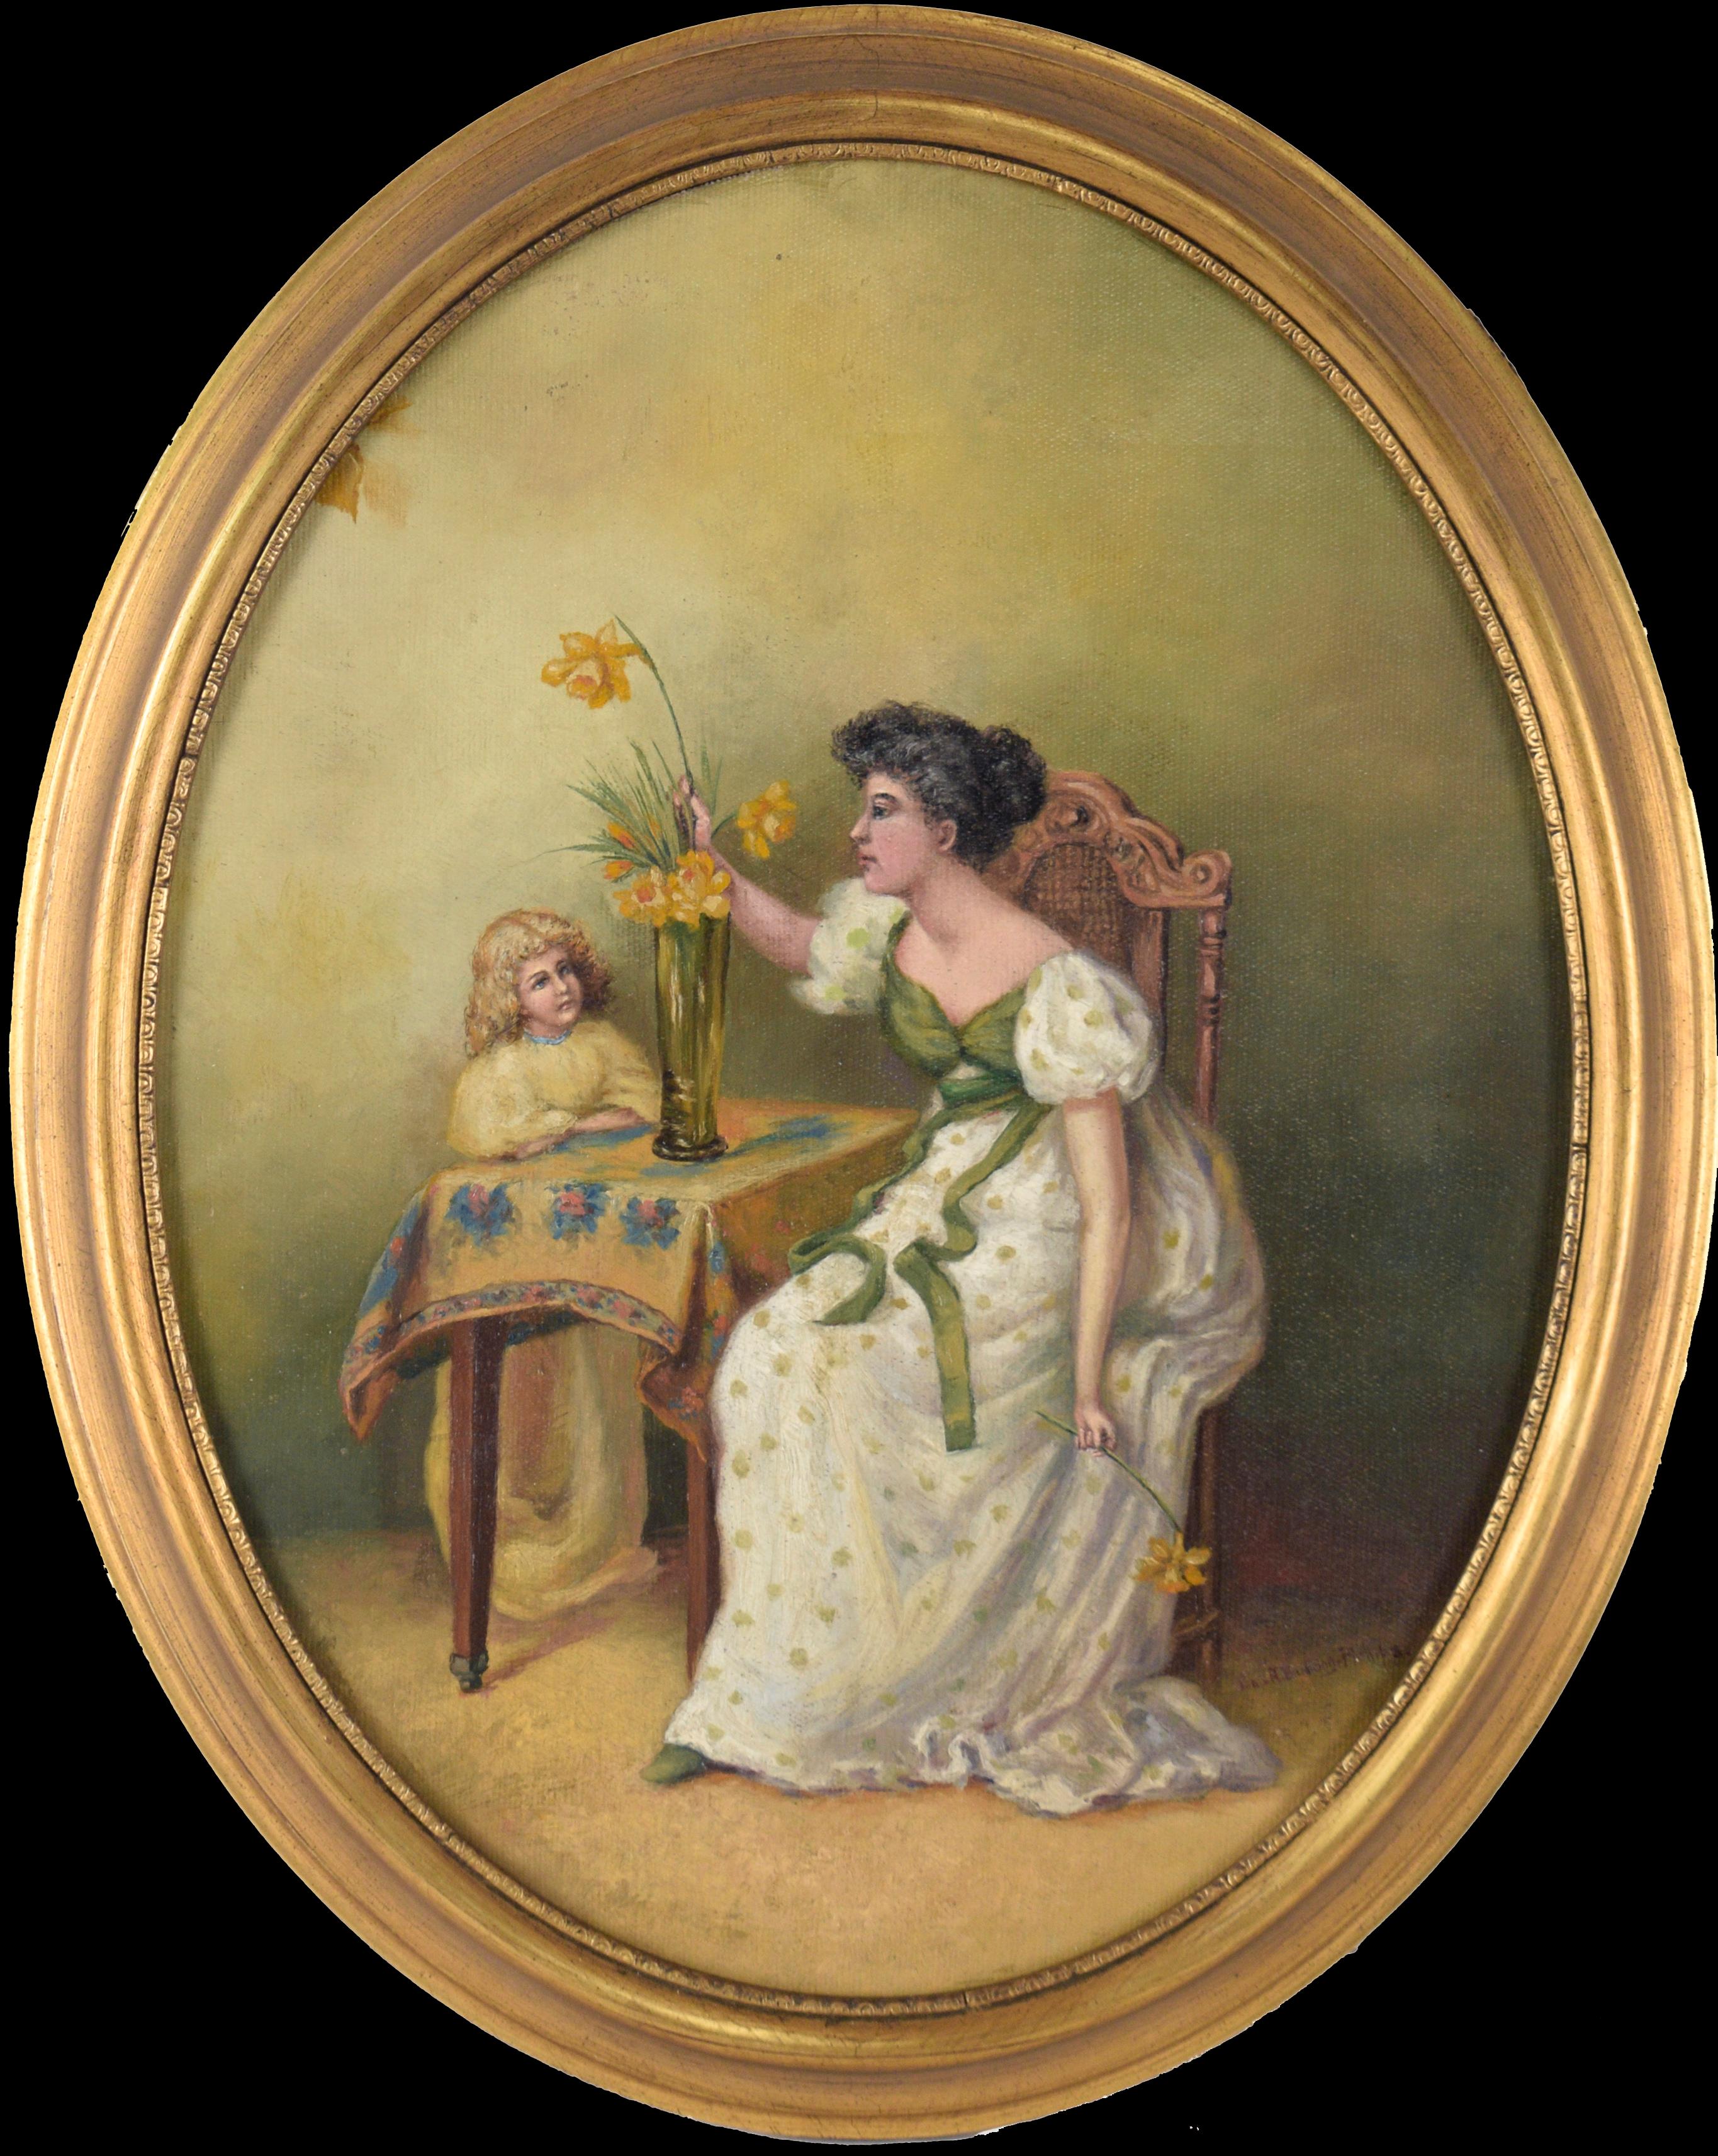 Mother and Daughter Arranging Daffodils in a Vase - Oil on Canvas - Painting by Lois A. Budlong-Phillips